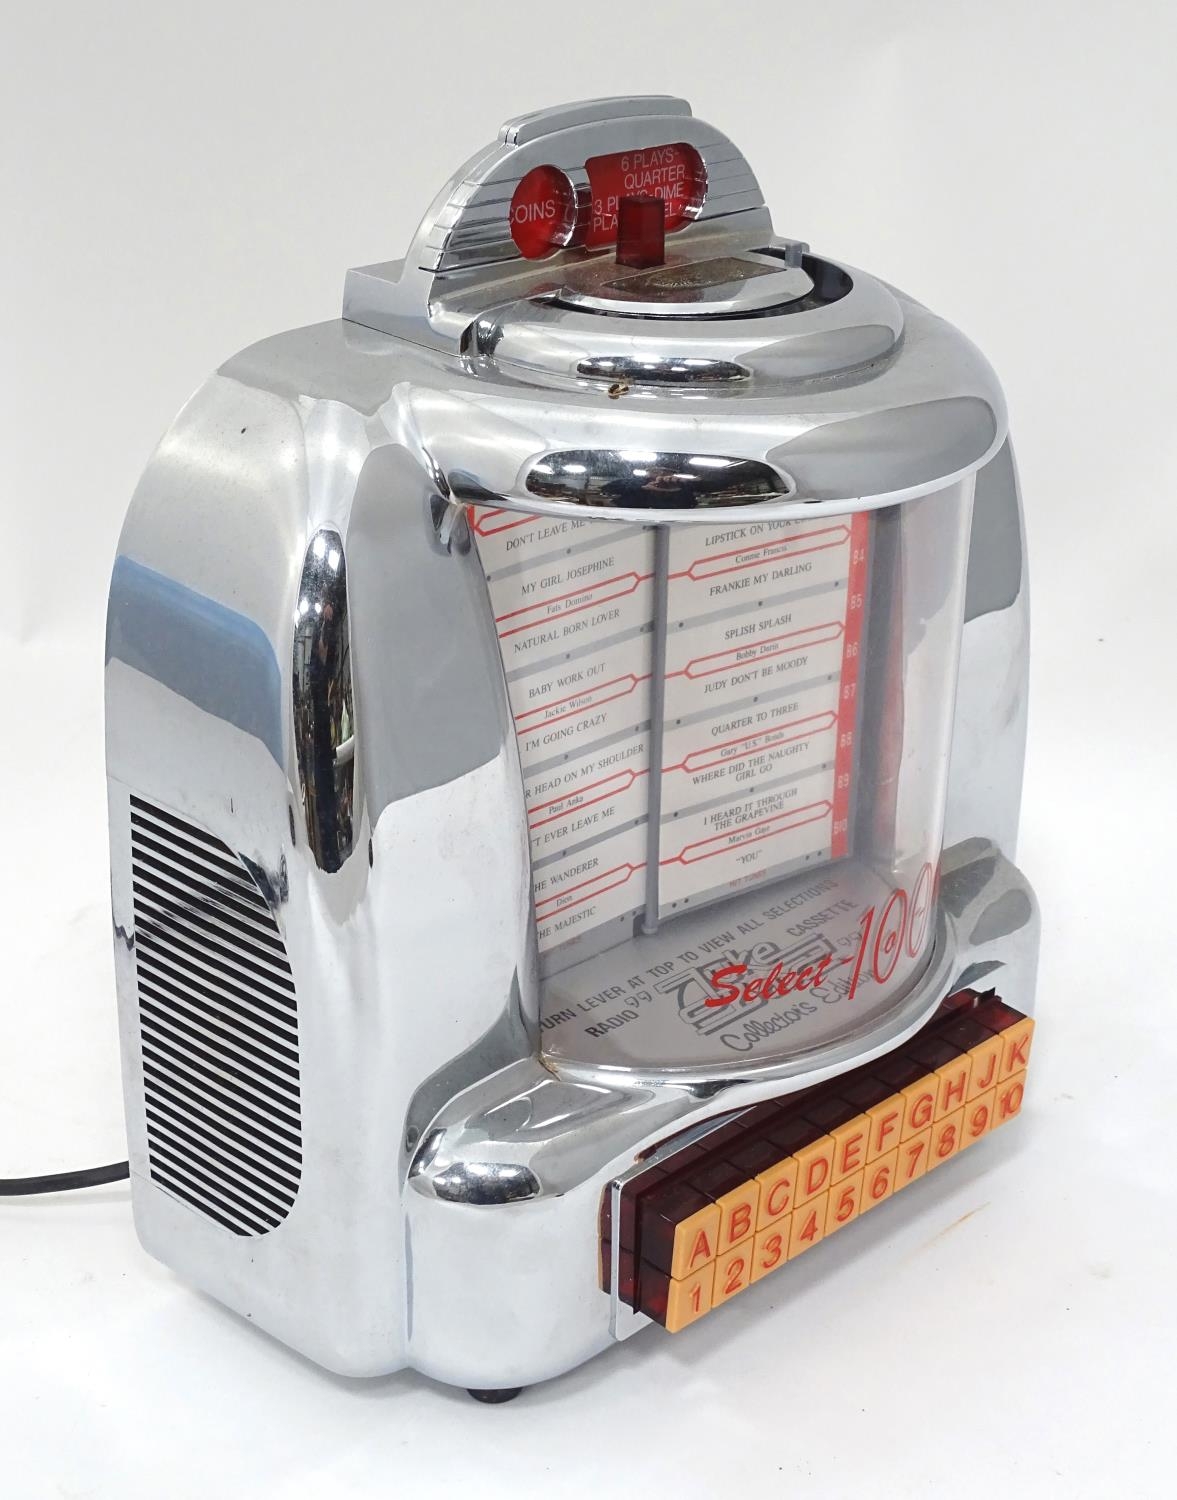 A table top novelty juke box Please Note - we do not make reference to the condition of lots